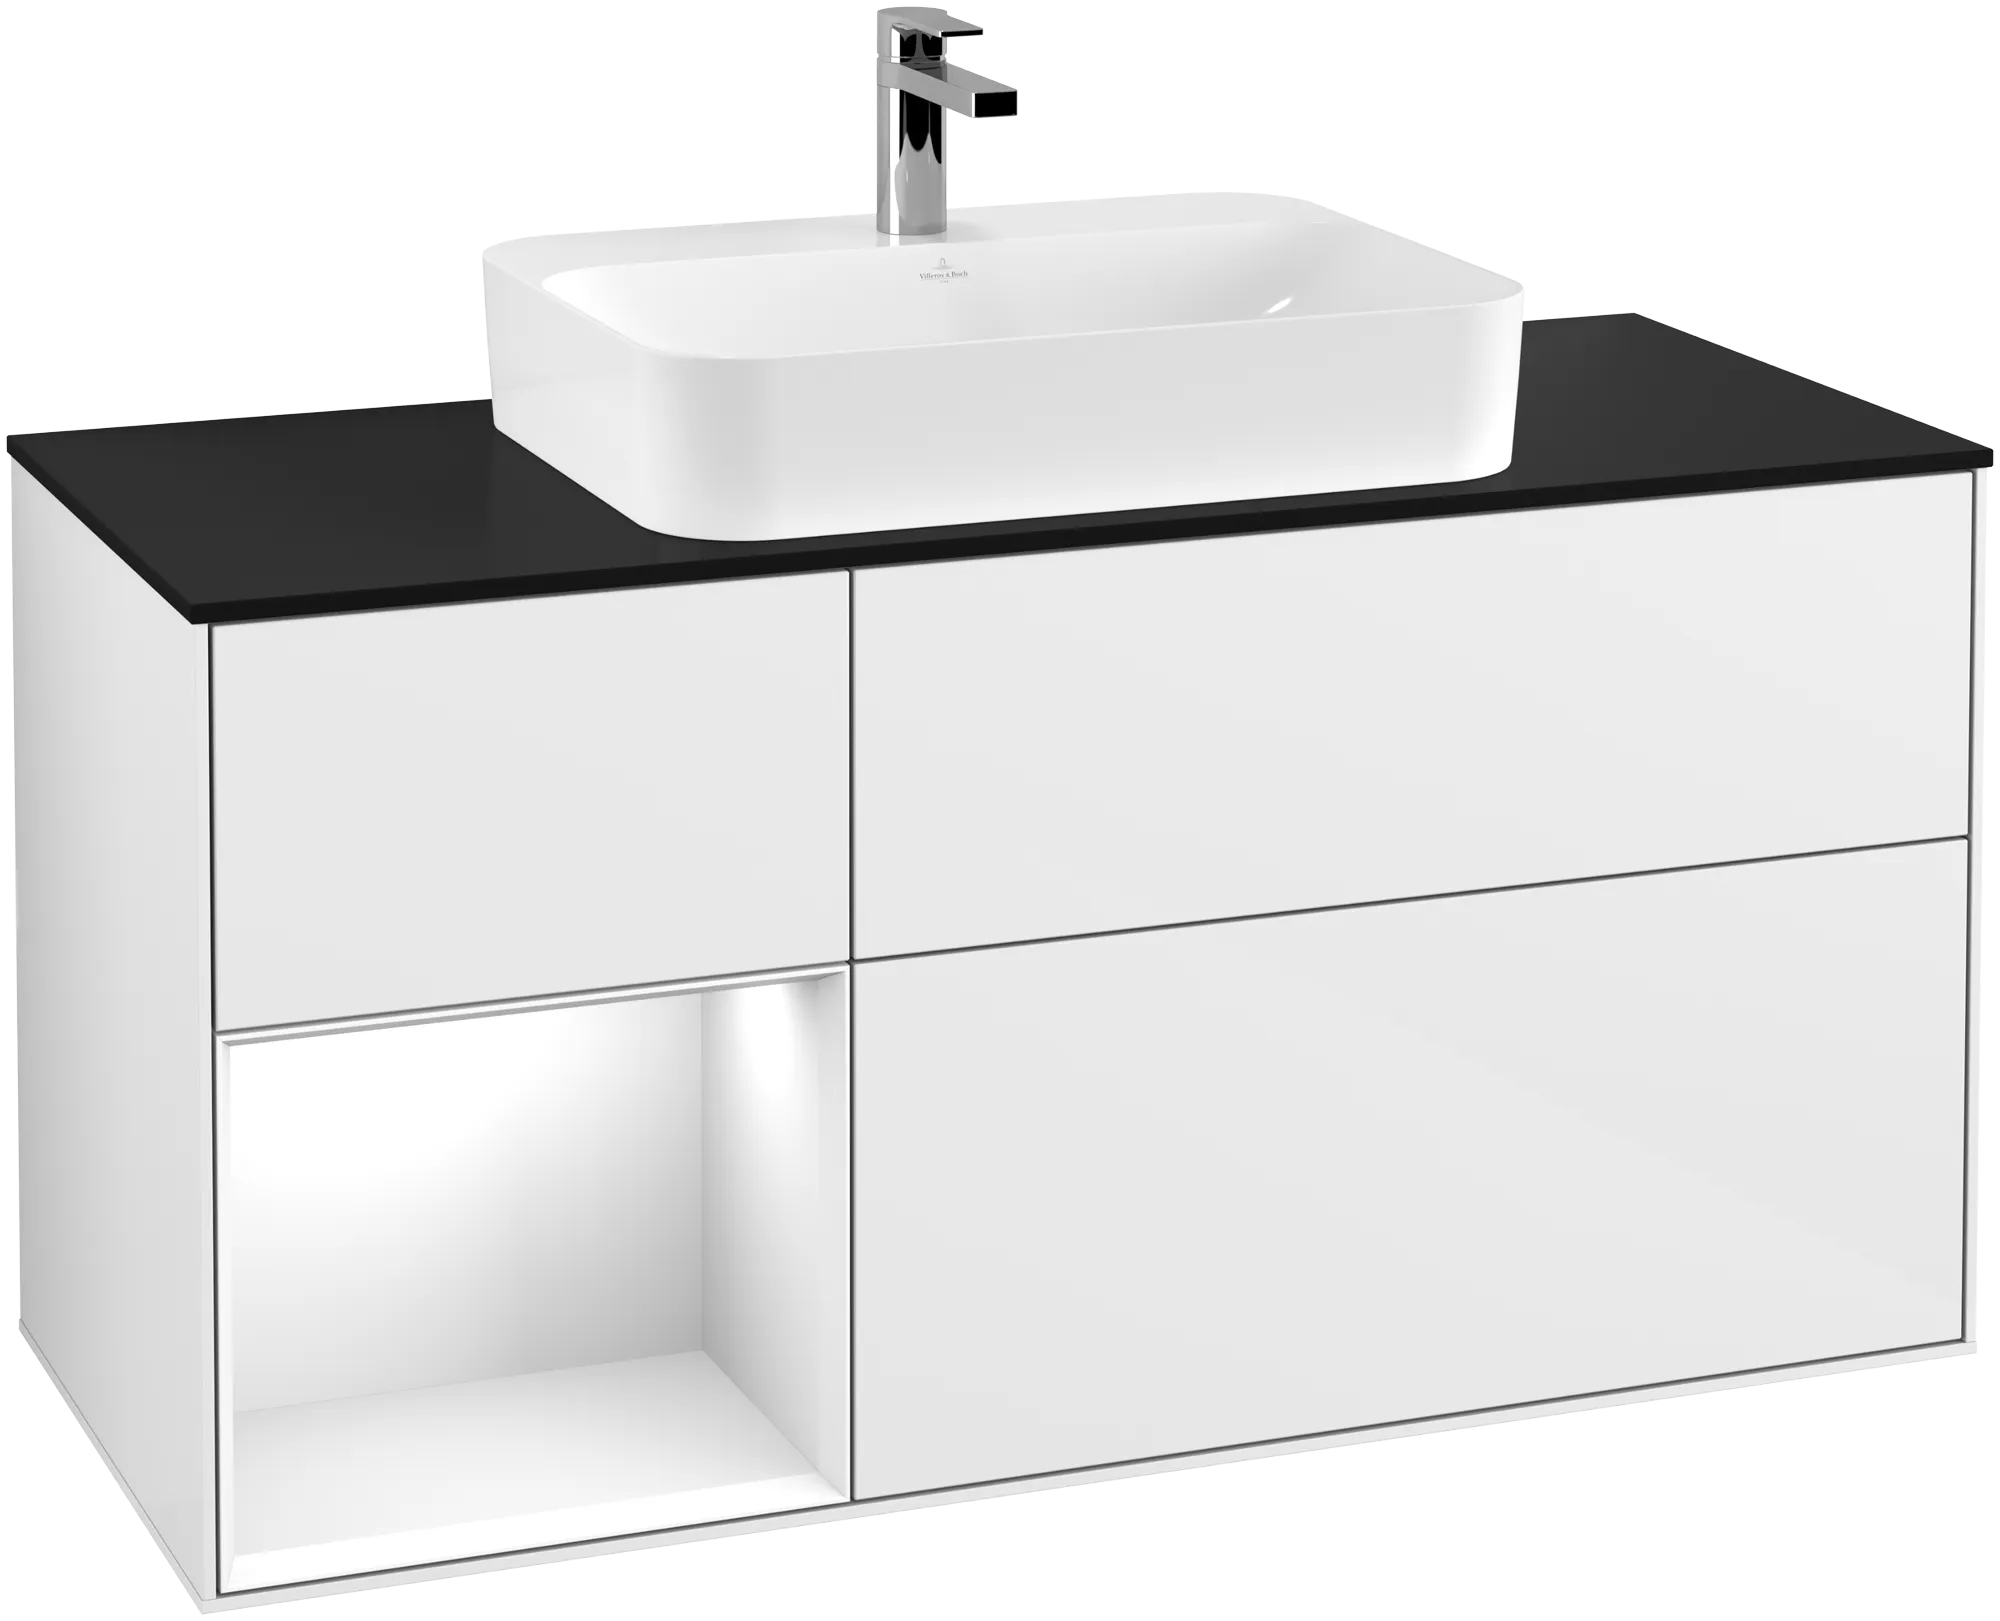 Picture of VILLEROY BOCH Finion Vanity unit, with lighting, 3 pull-out compartments, 1200 x 603 x 501 mm, Glossy White Lacquer / Glossy White Lacquer / Glass Black Matt #G412GFGF